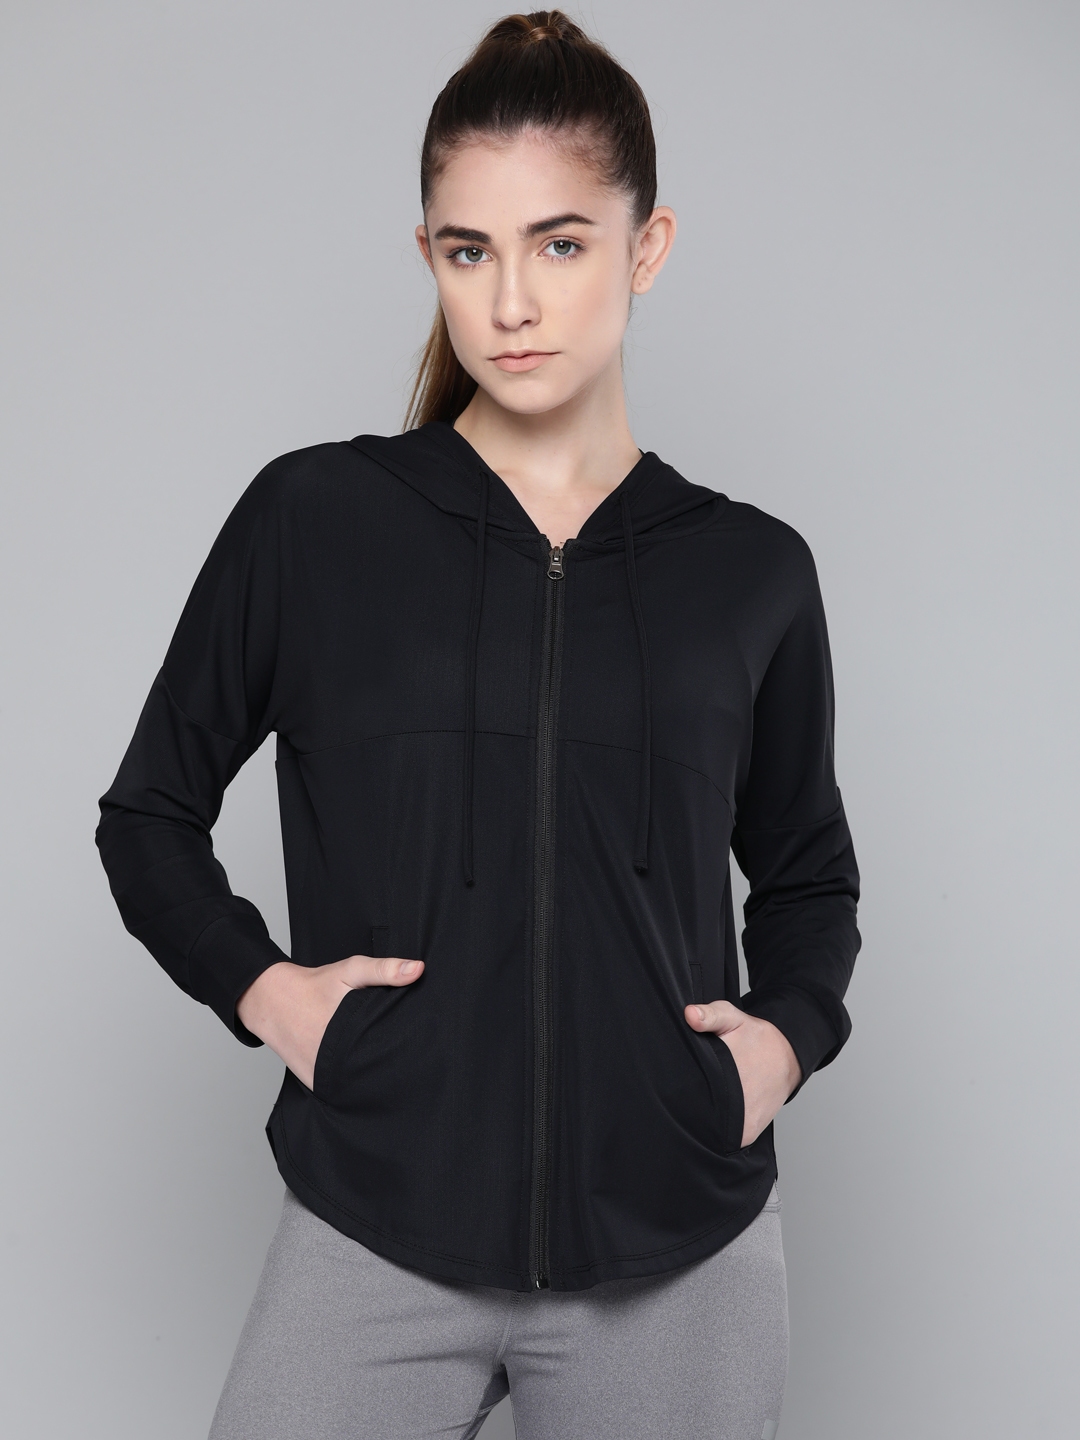 Buy Fitkin Women Black Solid Lightweight Hooded Training Jacket ...